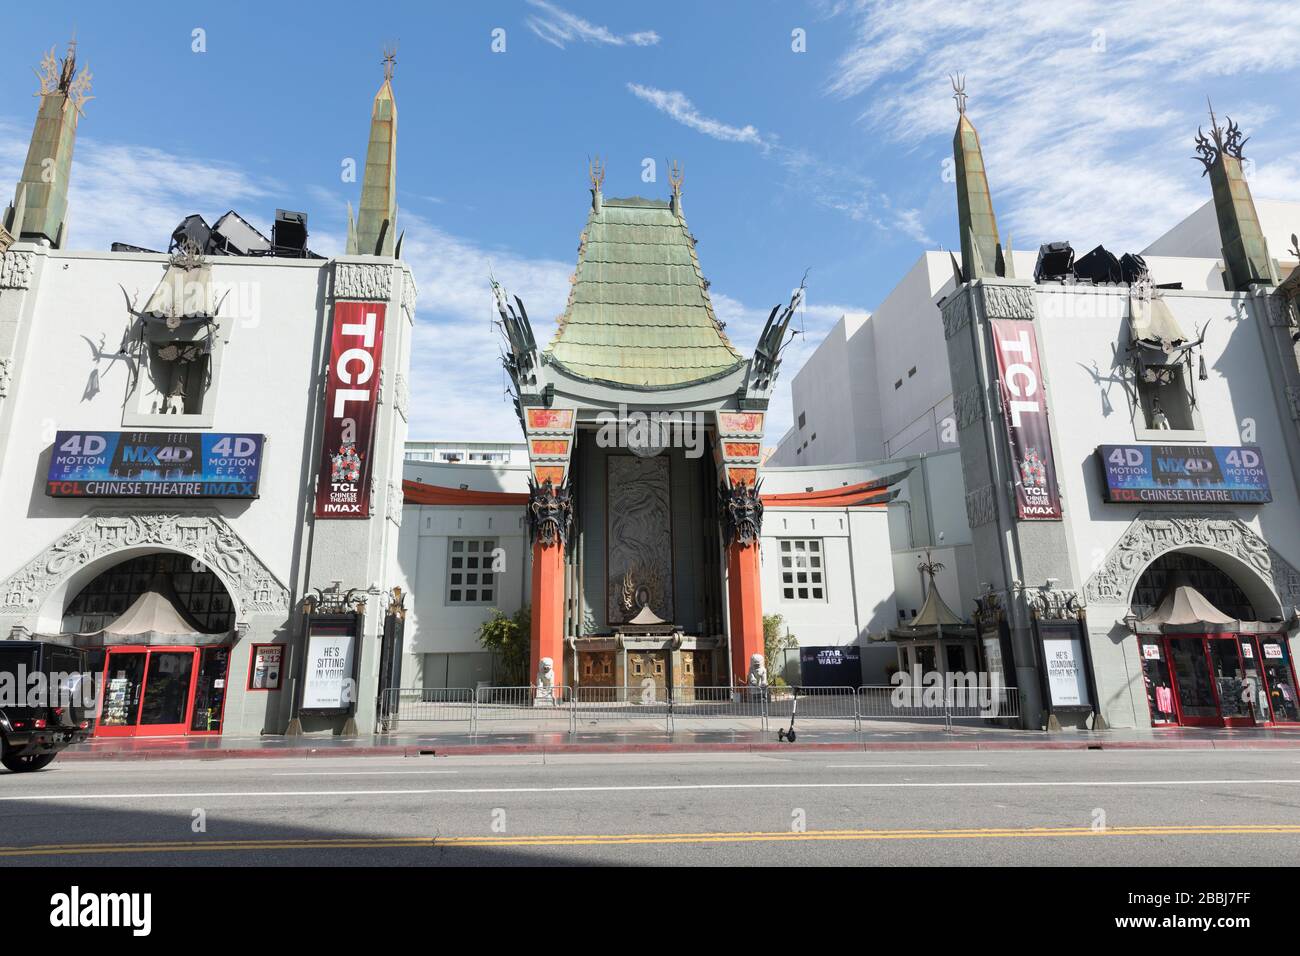 The TCL Chinese Theater in Hollywood, Los Angeles on March 22, 2020 during the Coronavirus lockdown. Stock Photo